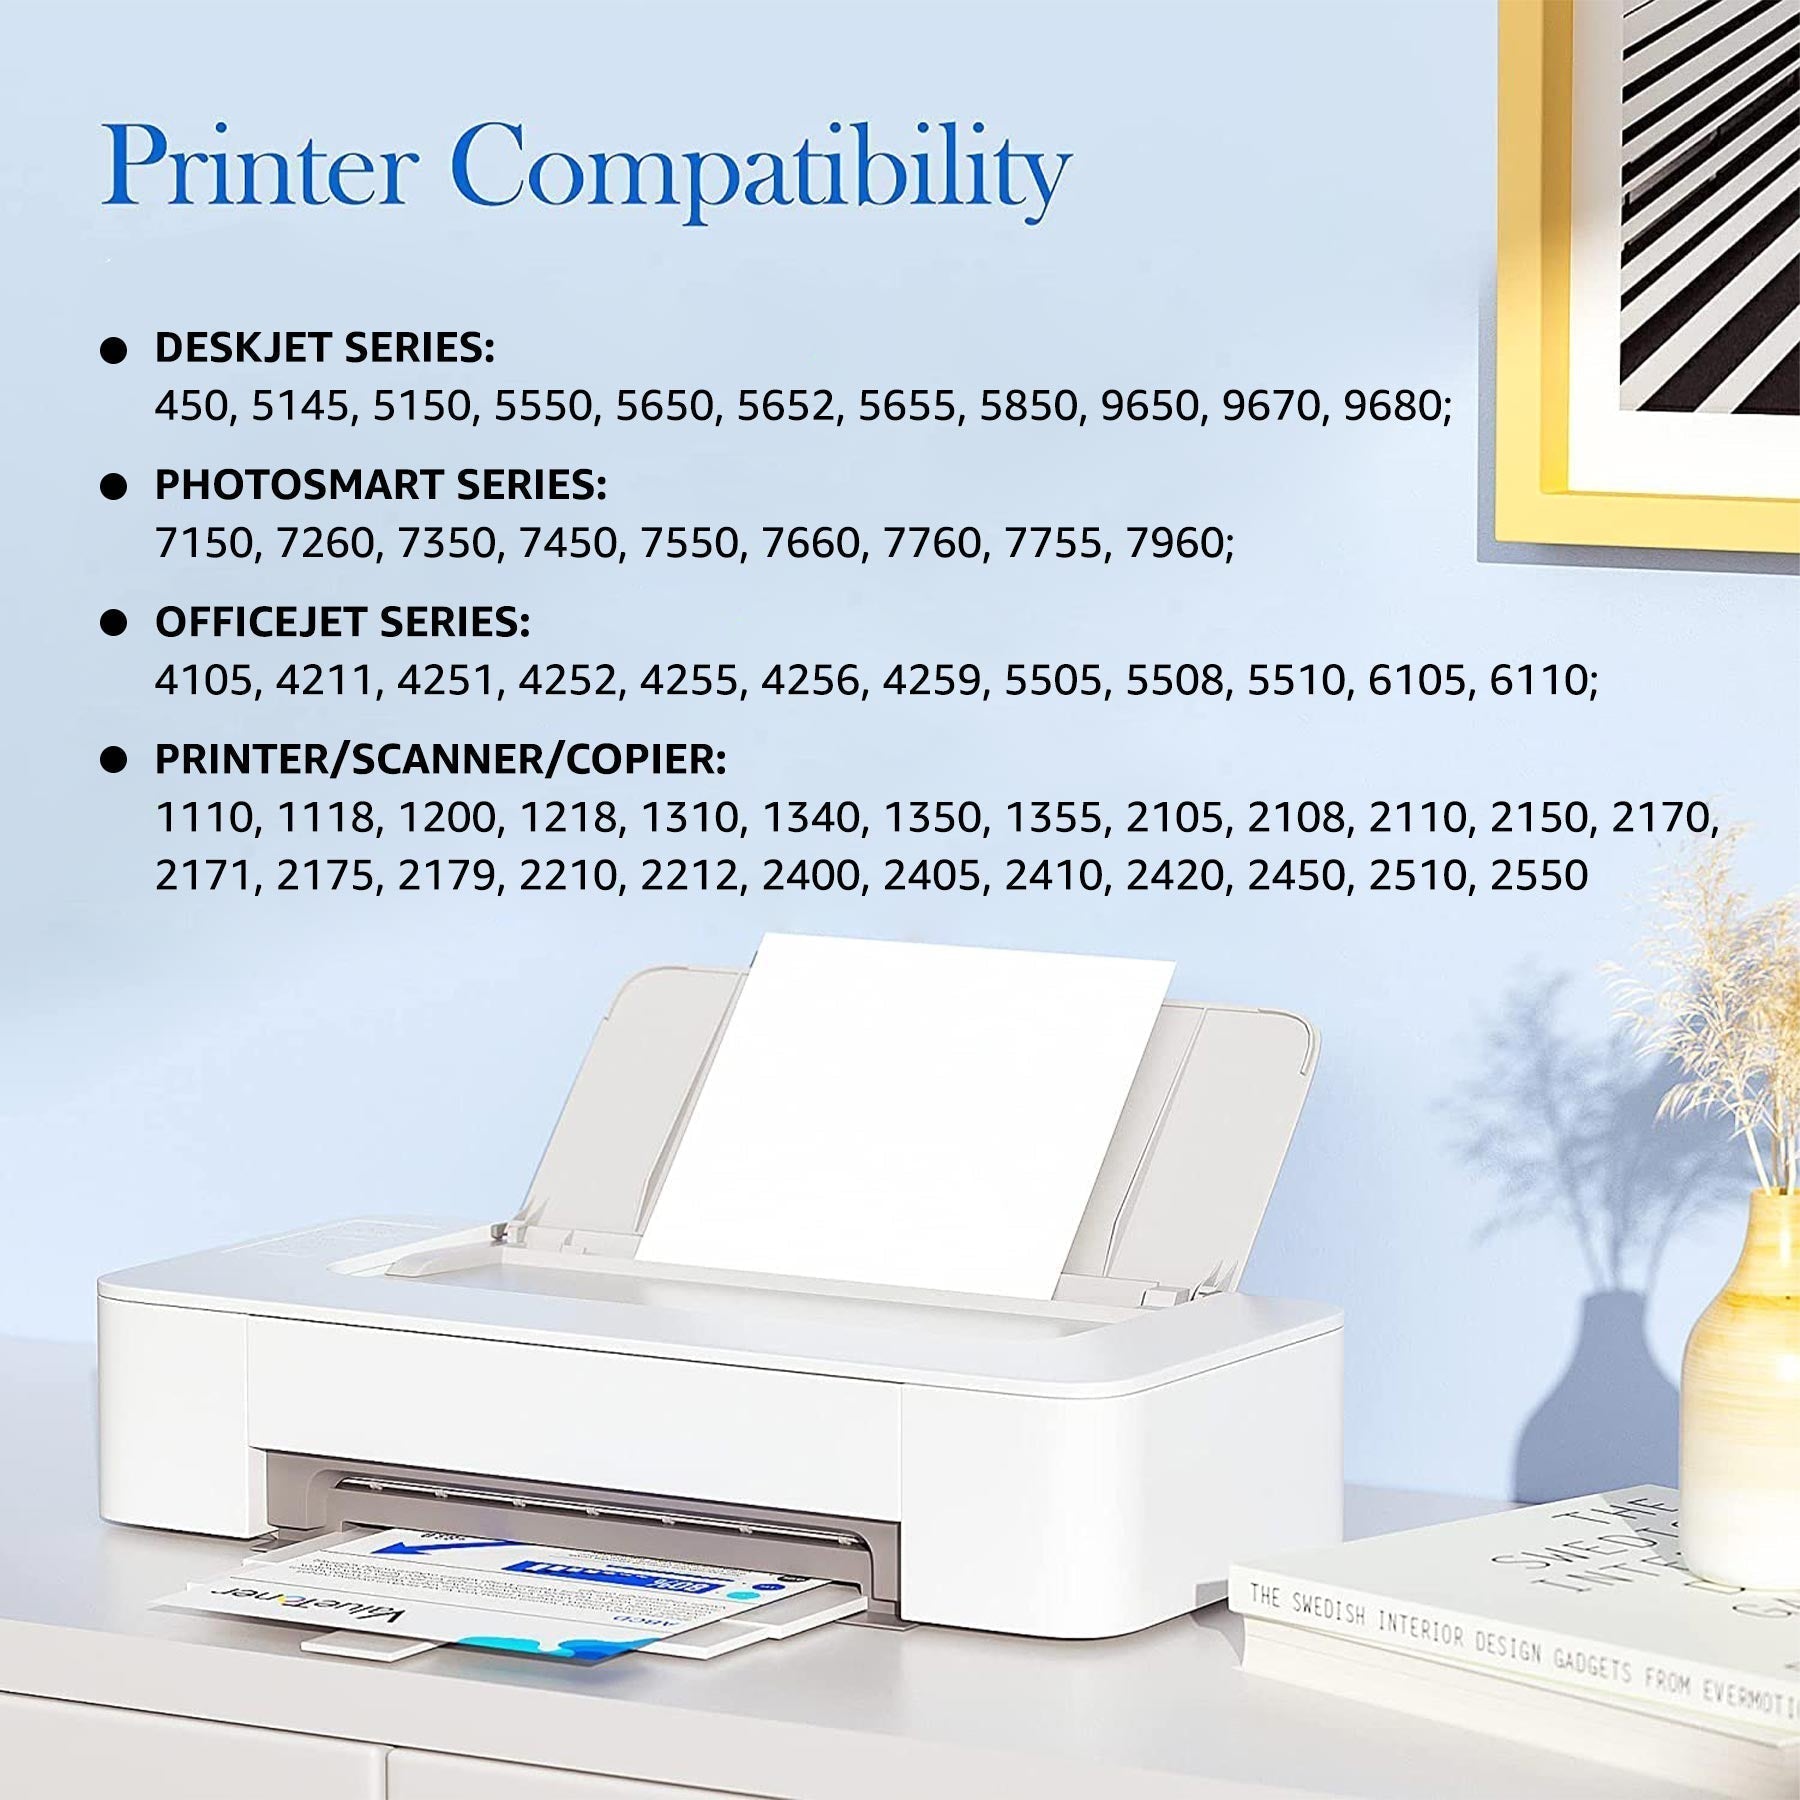 Halofox Printer Ink 64 XL Replacement for HP Ink 64